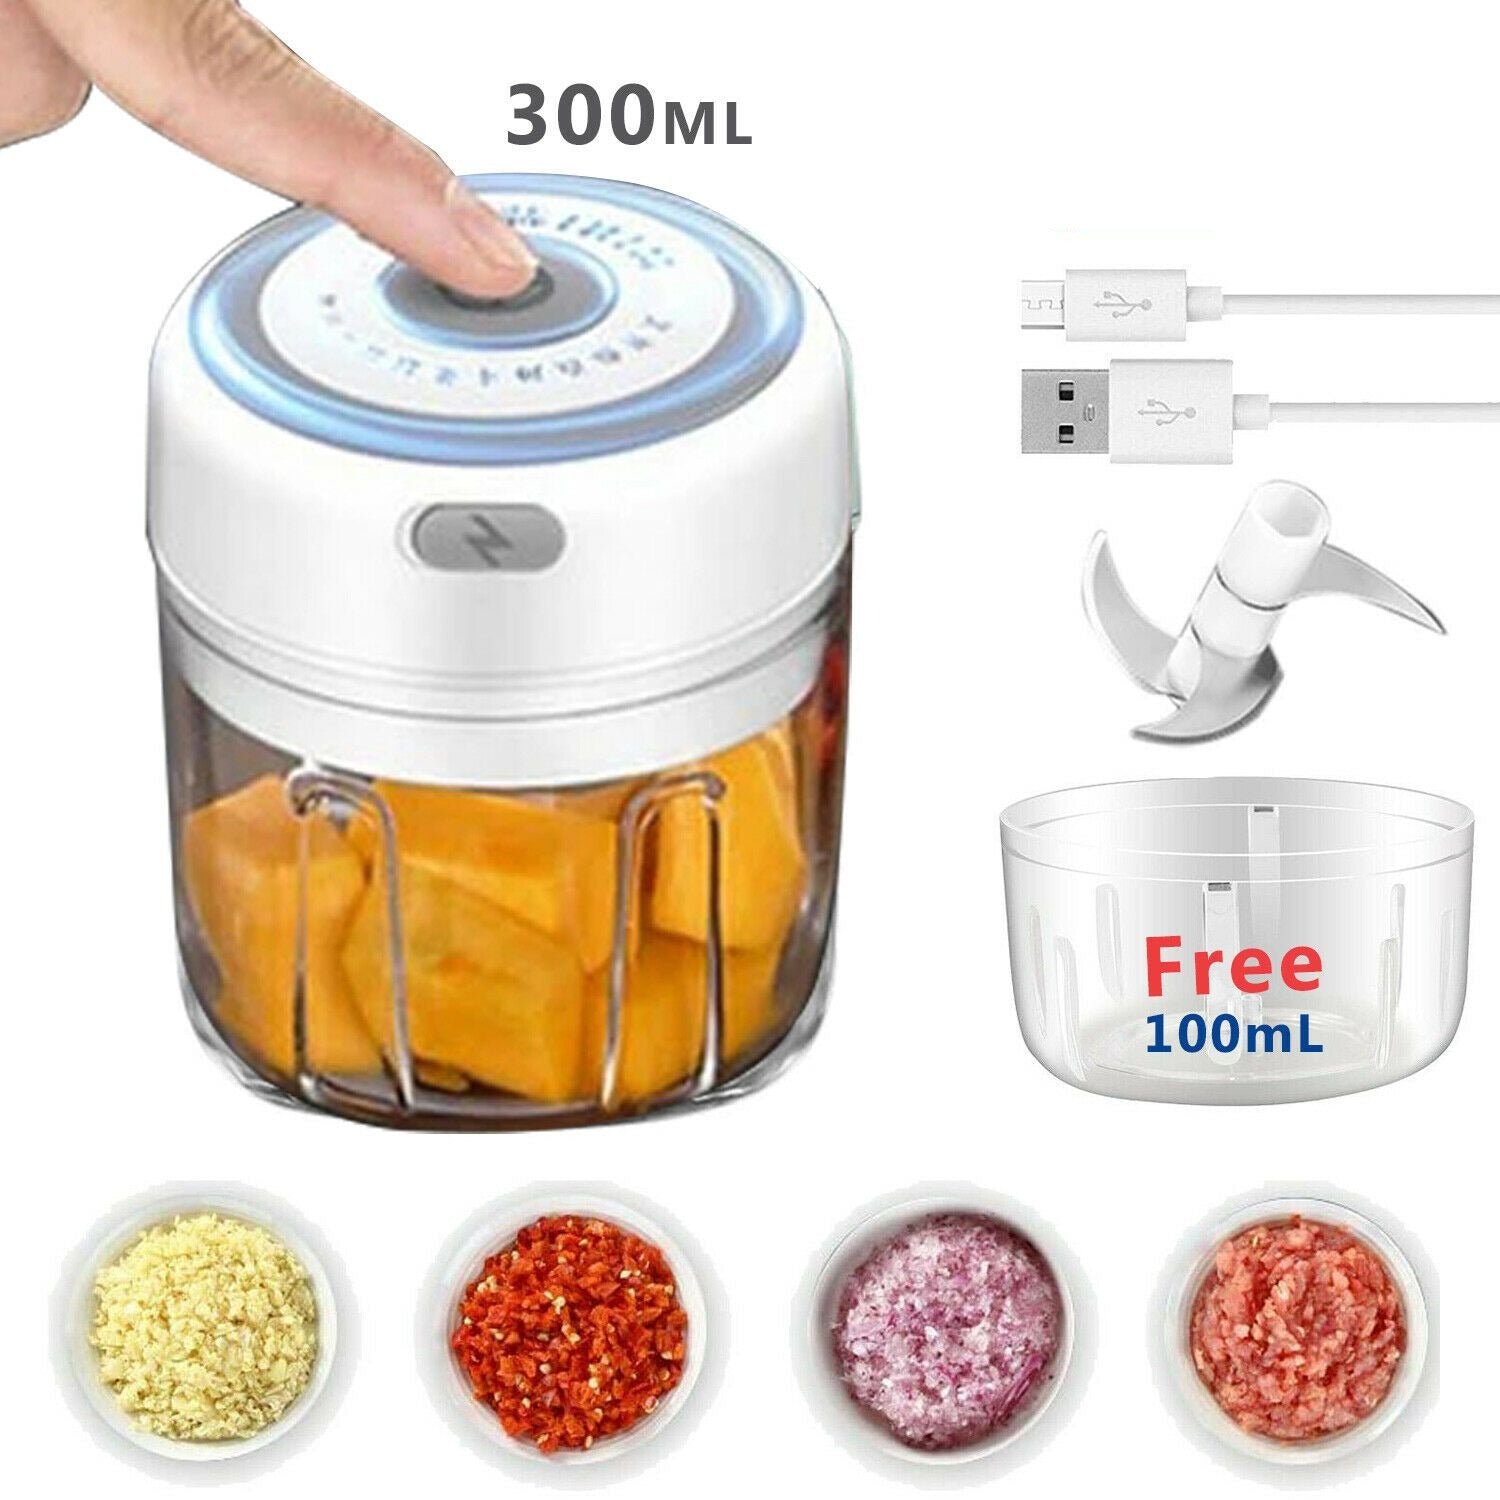 Electric 300ML Garlic Press, Meat Mincer, Blender And Mixer With 100ML Cup  Free